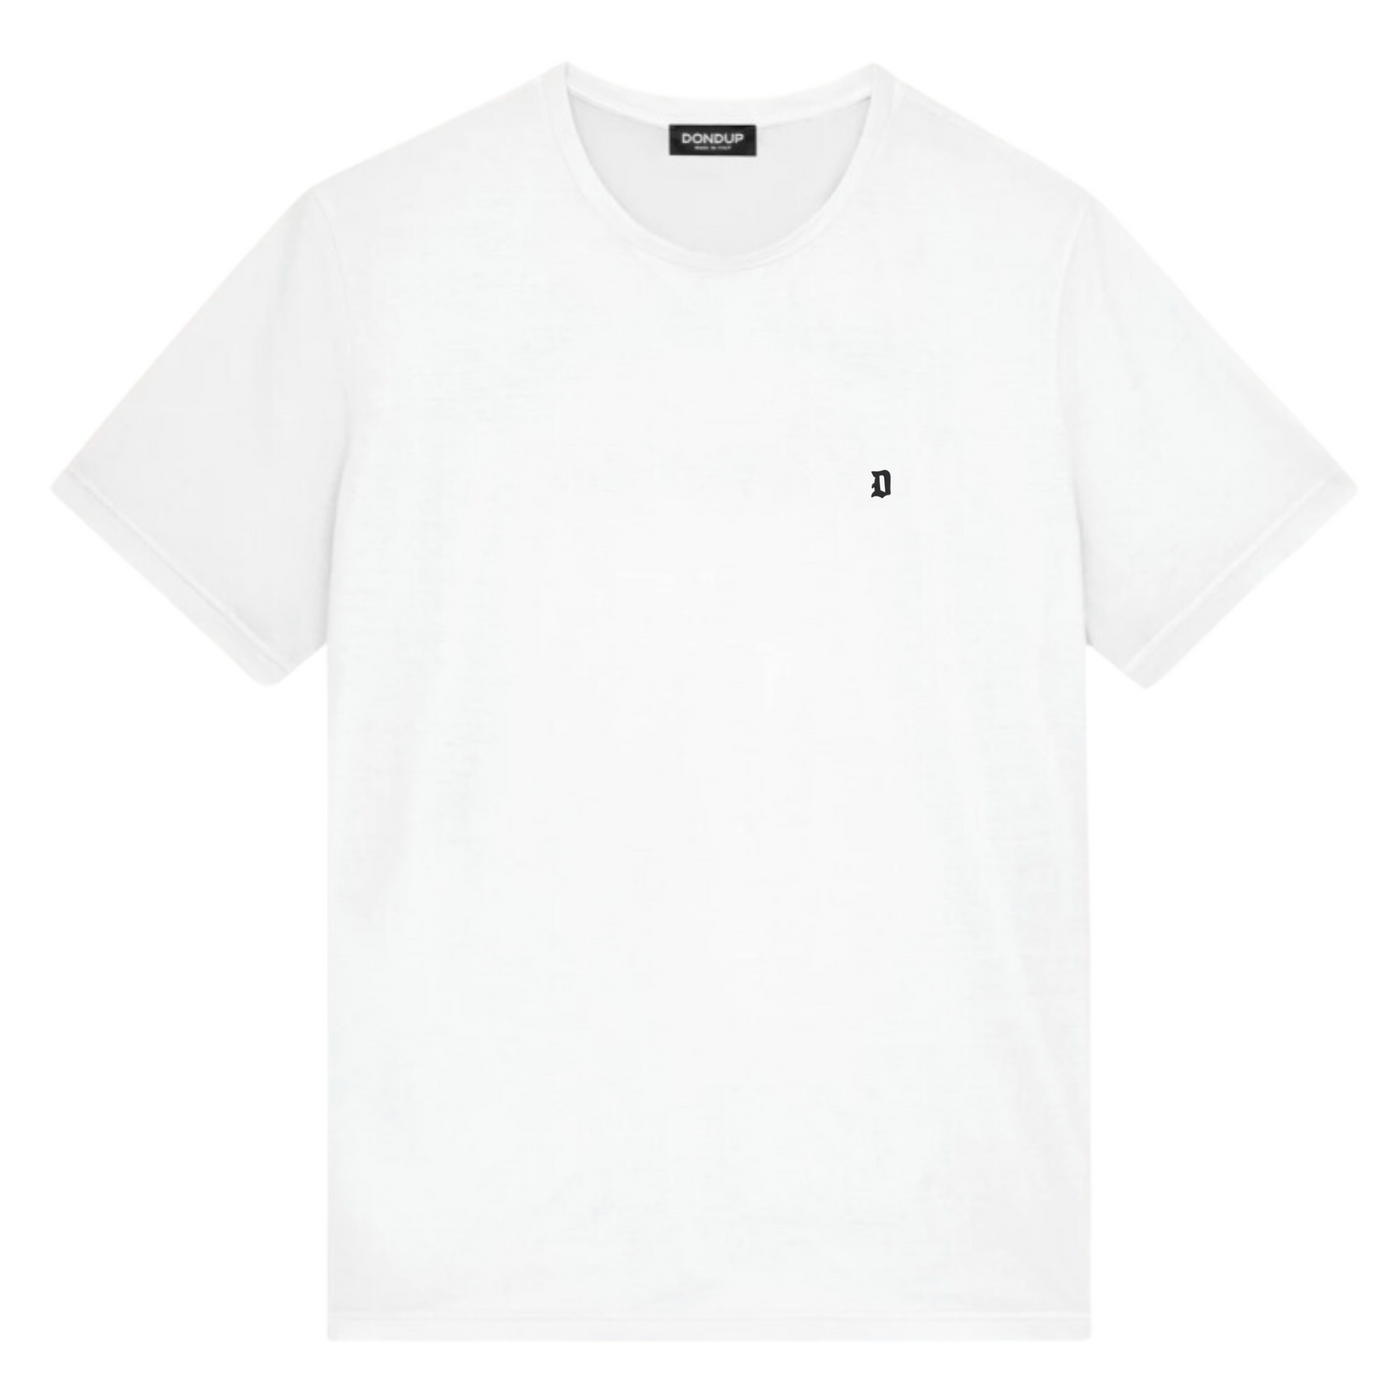 Dondup T-shirt in light gray with logo